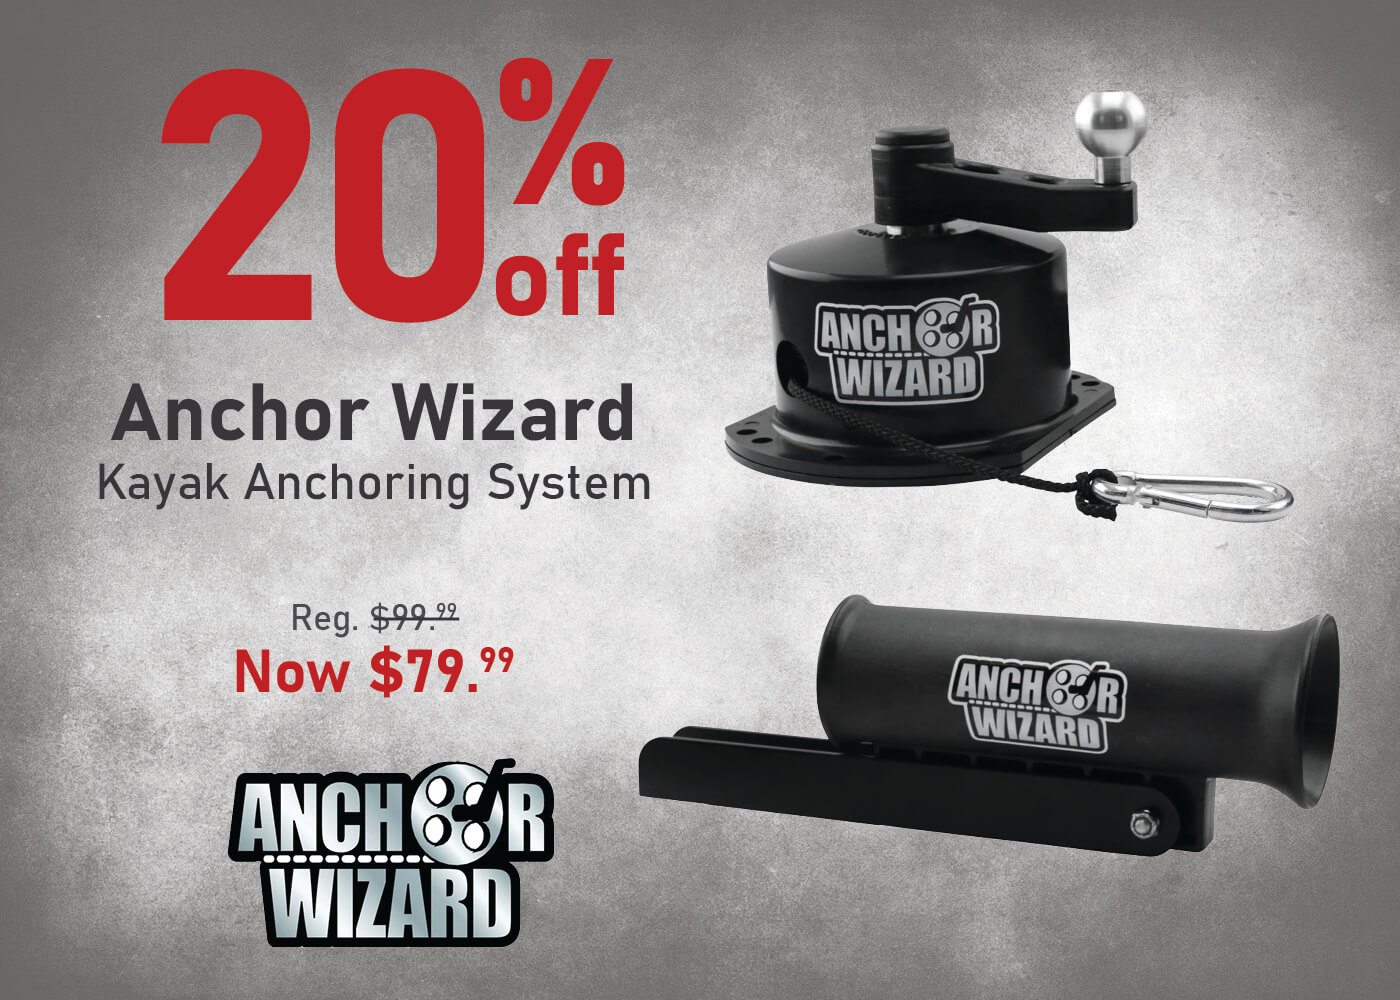 Take 20% off the Anchor Wizard Kayak Anchoring System